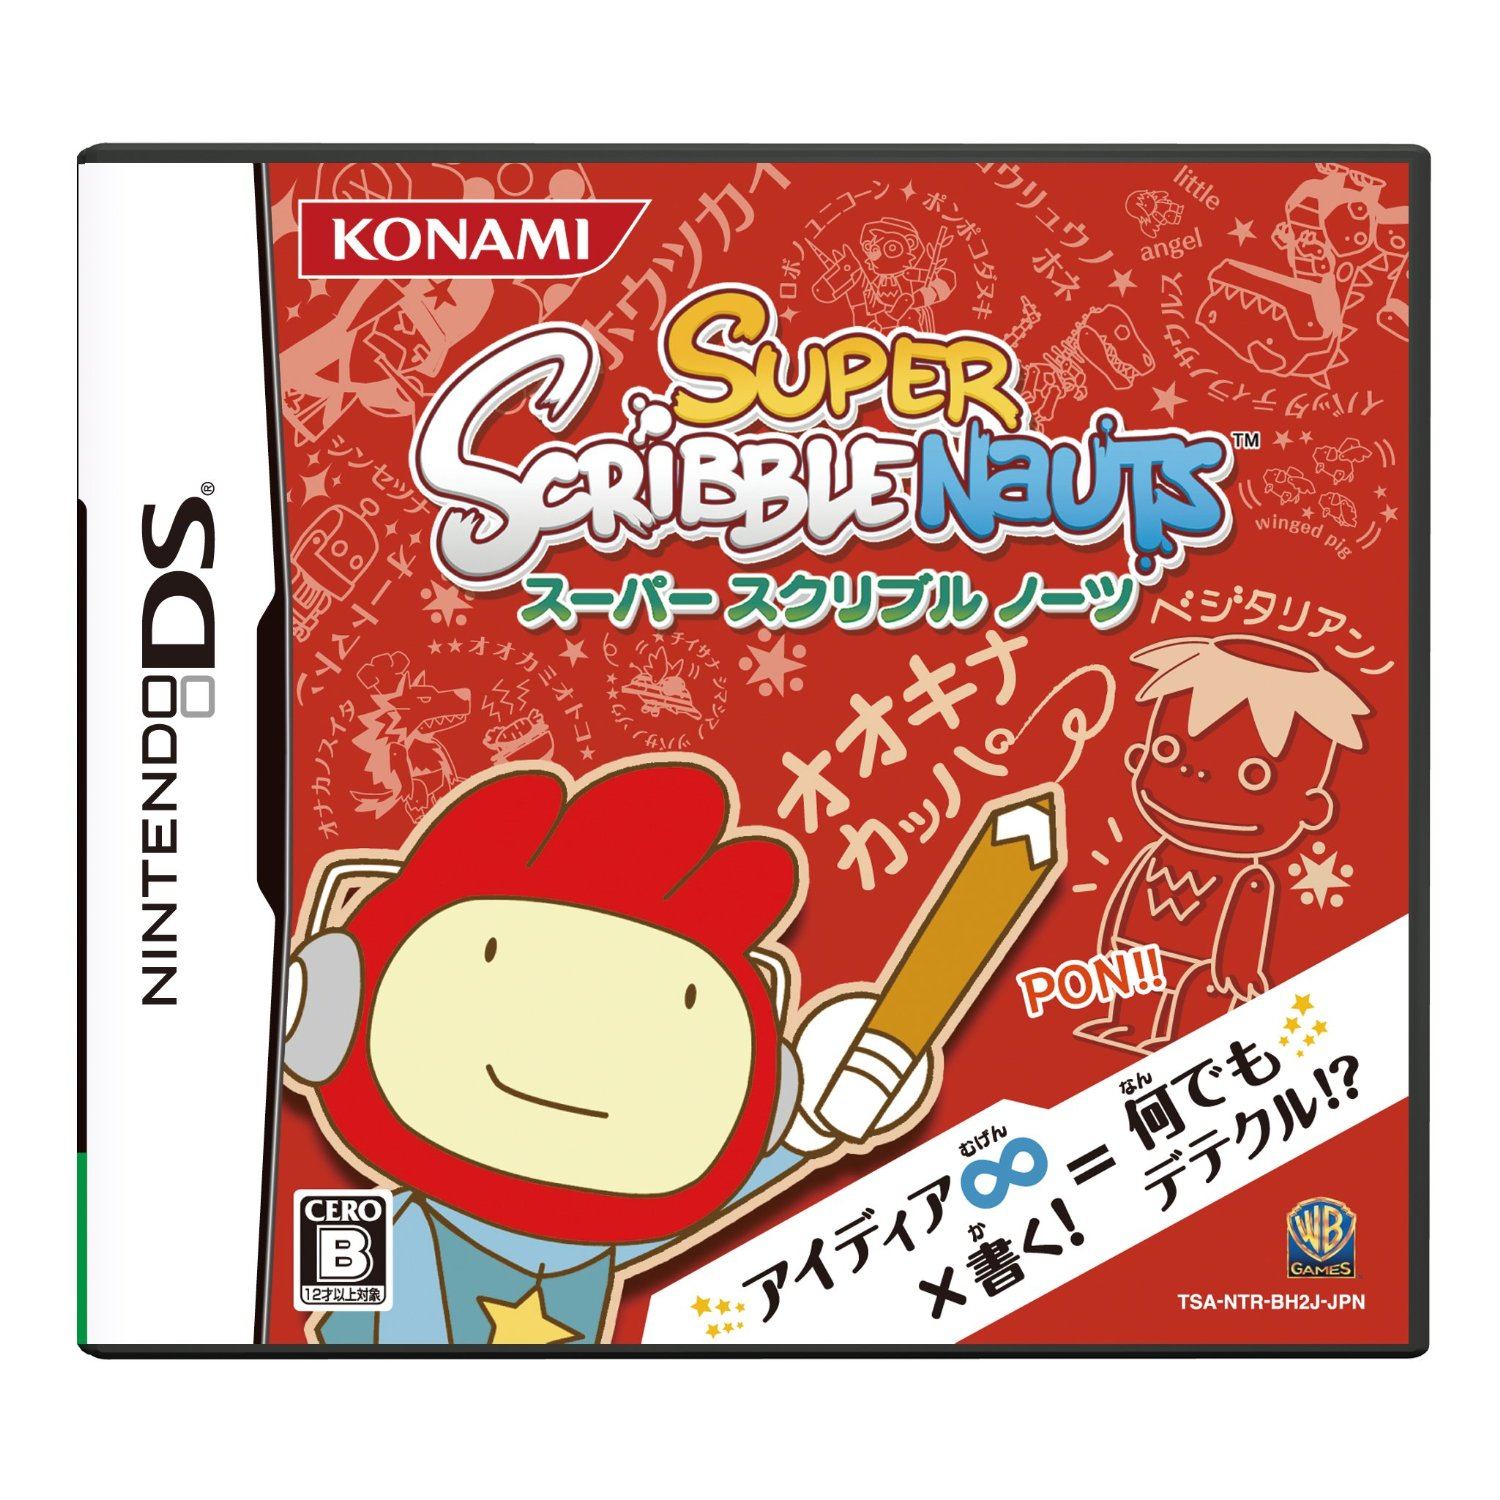 Super Scribblenauts for Nintendo DS - Bitcoin & Lightning accepted